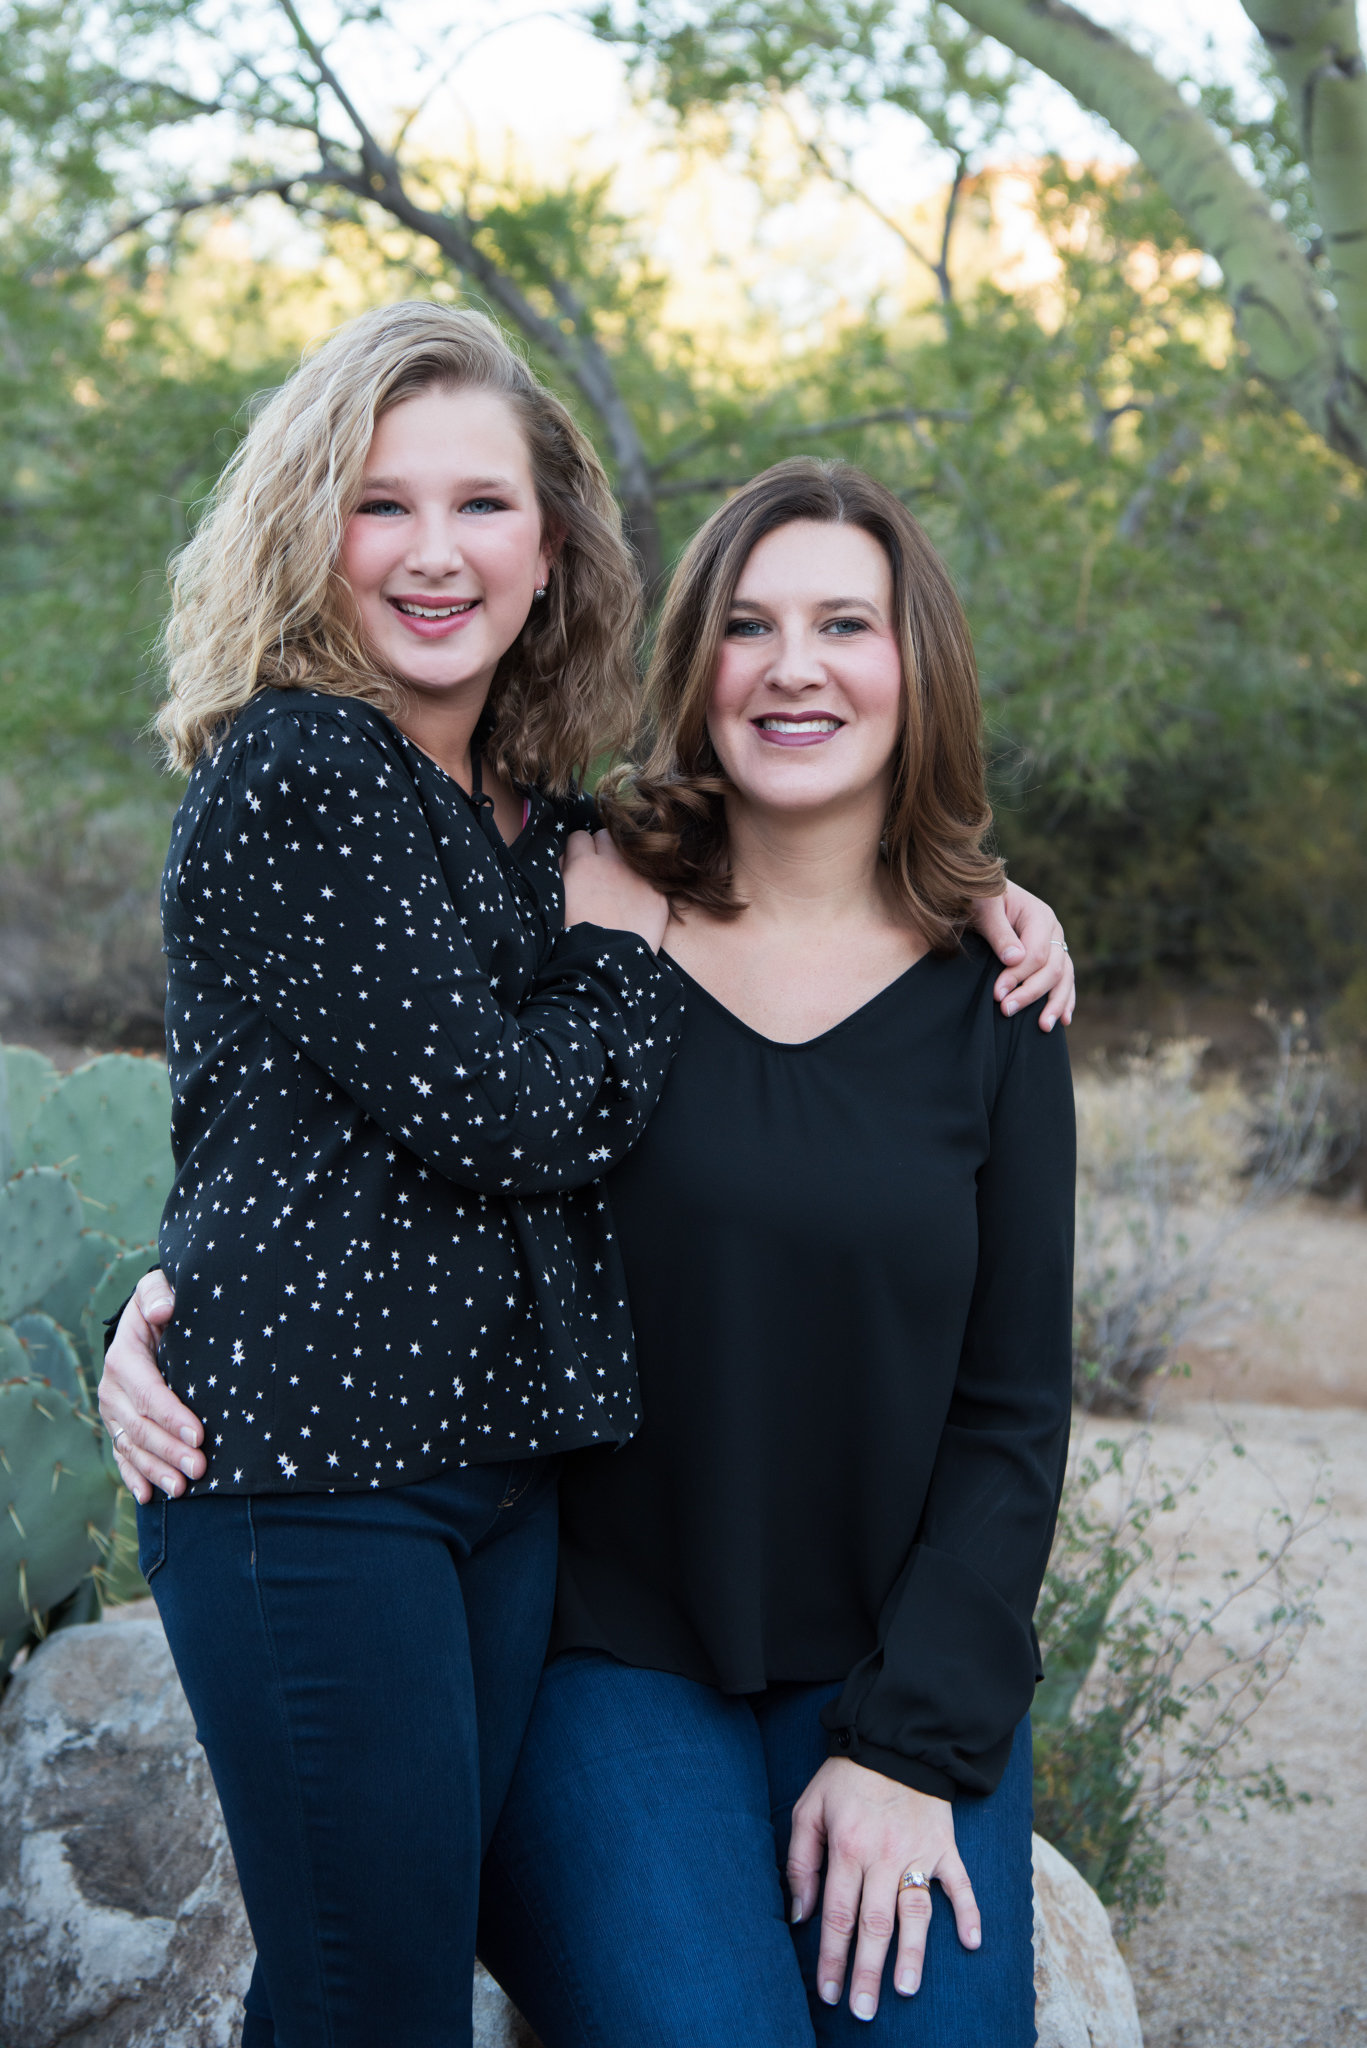 mom and teen daughter have their arms wrapped around each other and smiling